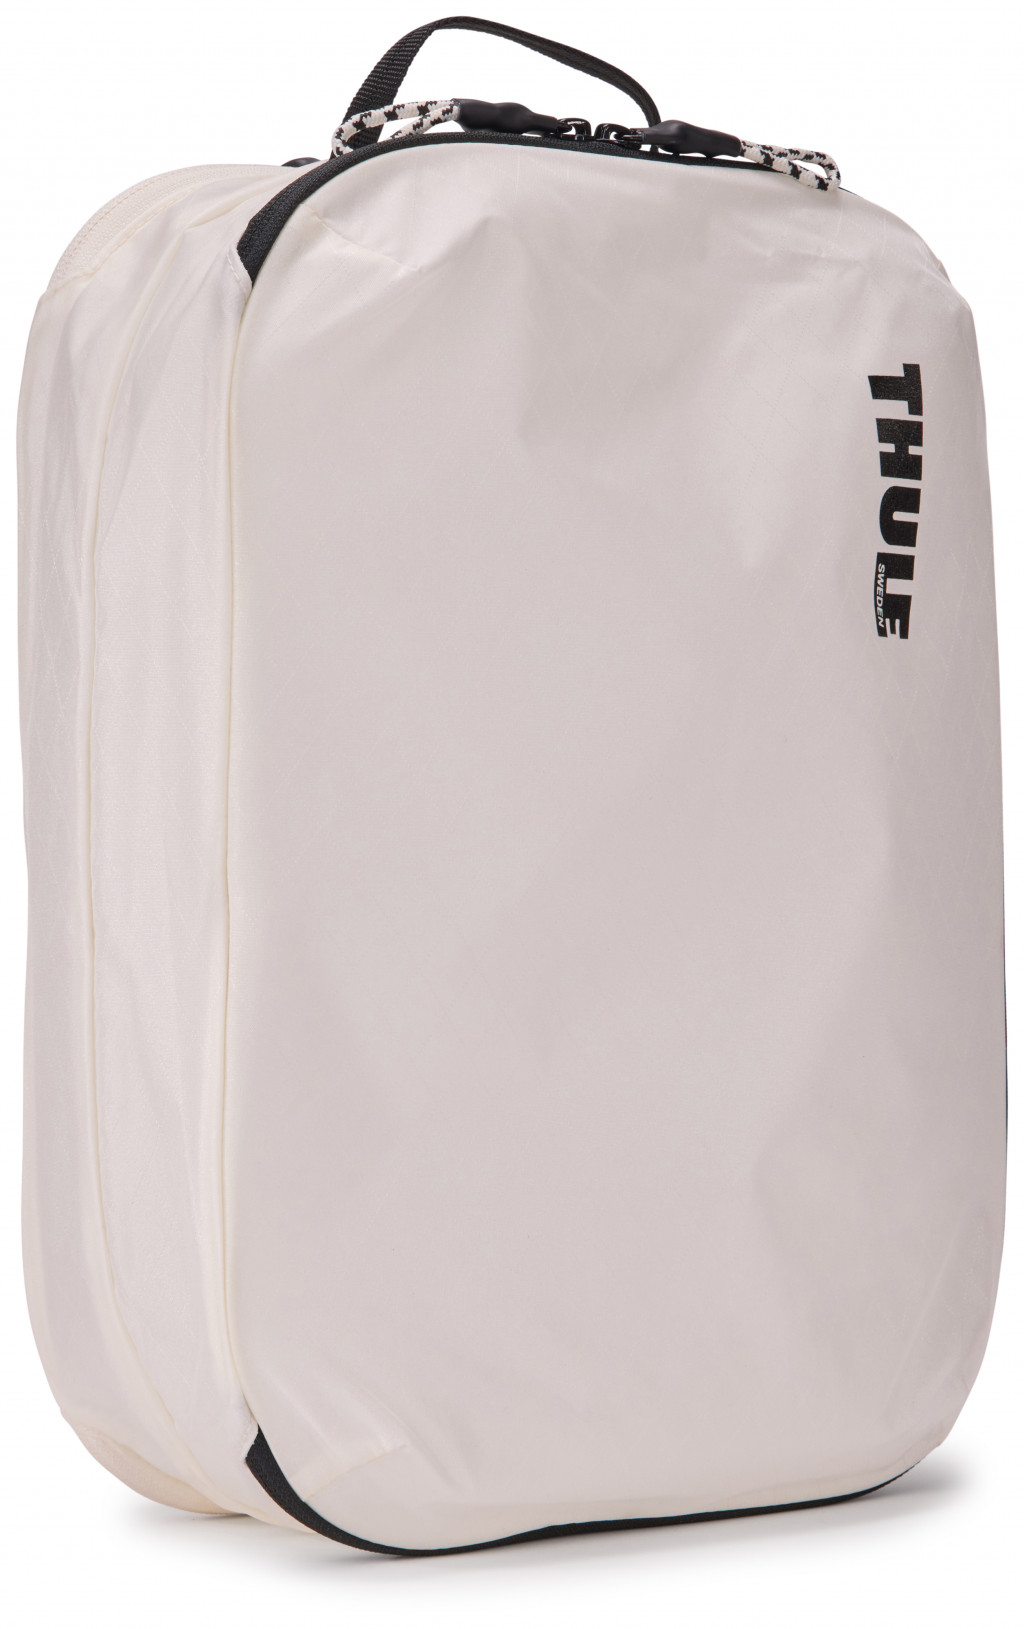 THULE TCCD201 WHITE Clean/Dirty Packing